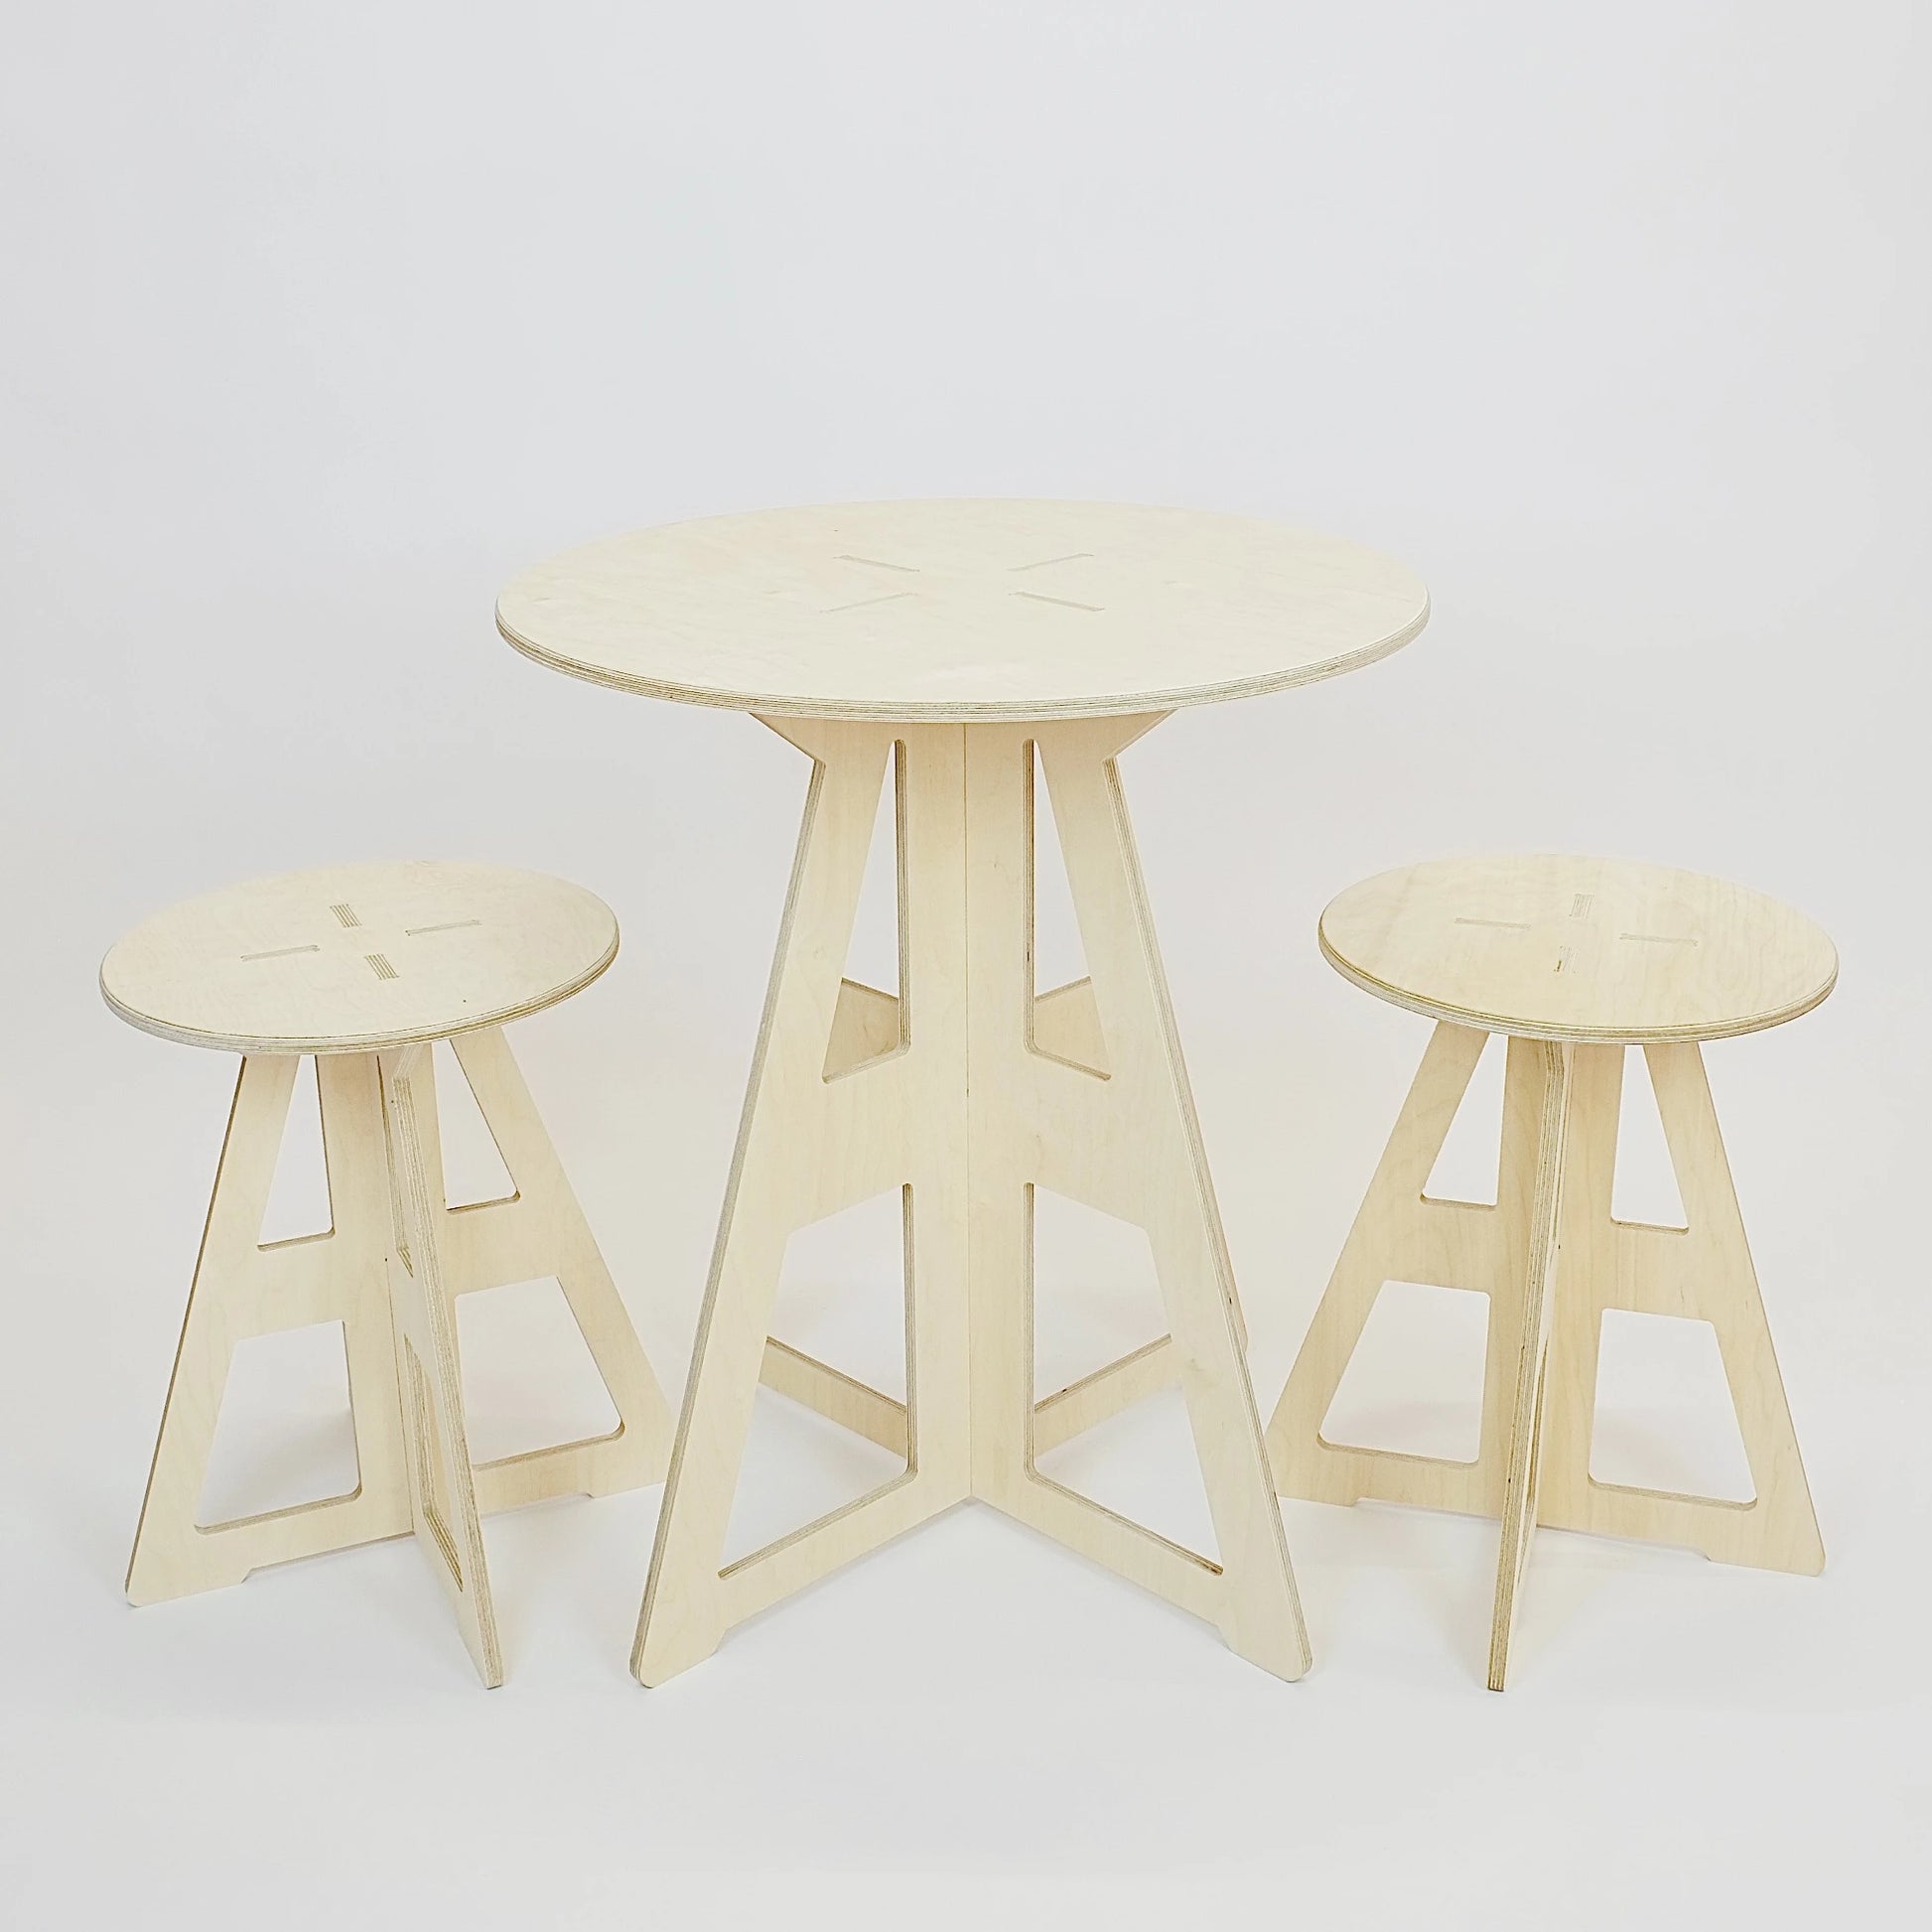 A simple modern pale wooden small table top and legs. It has a round top and triangle legs which have slotted together in a cross shape with  two matching stools.